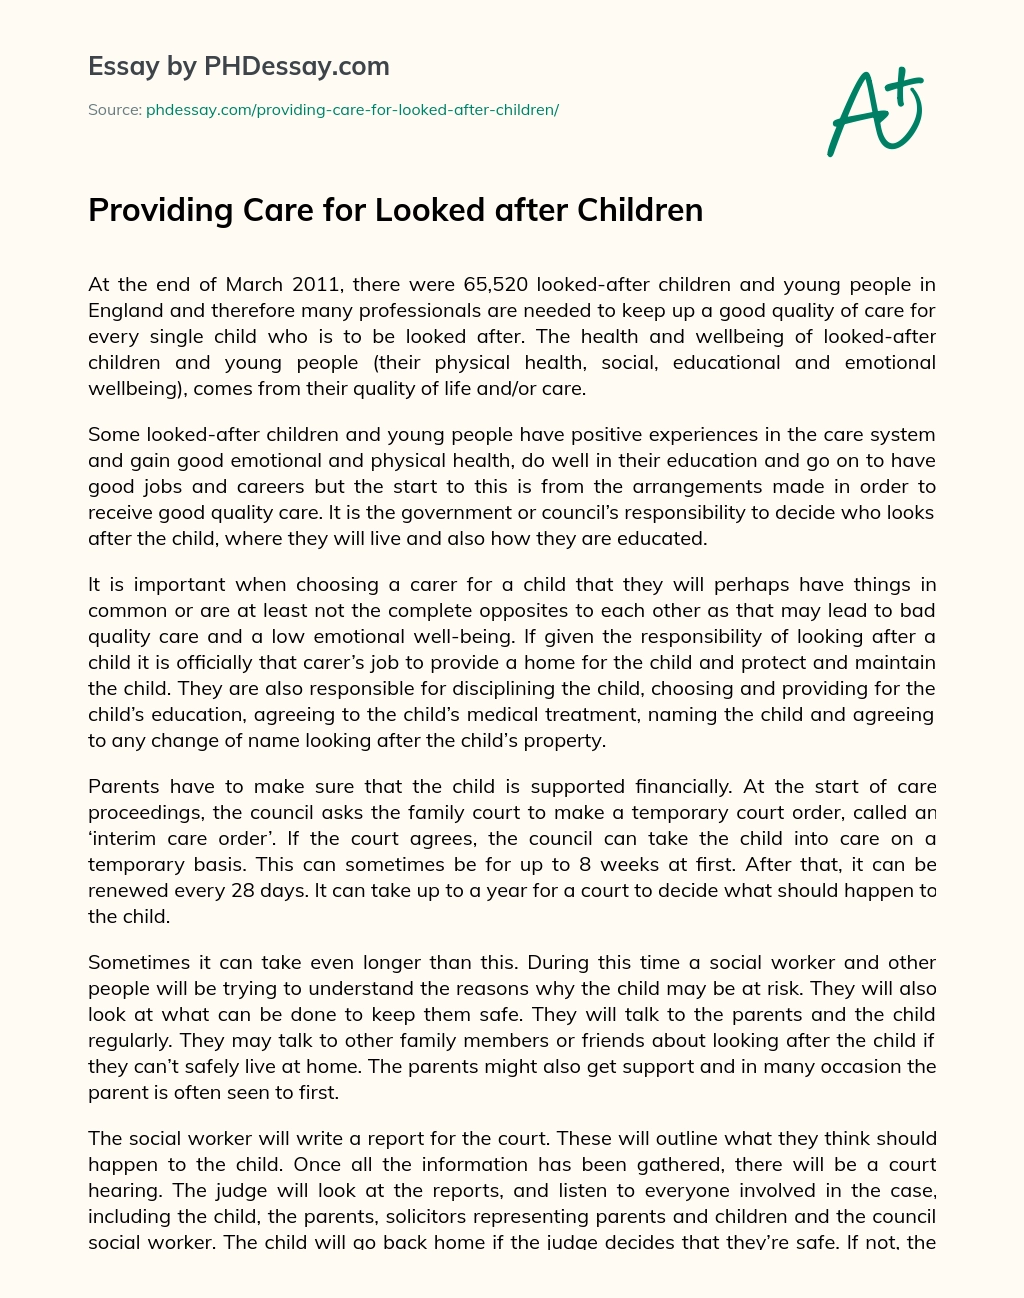 Providing Care for Looked after Children essay